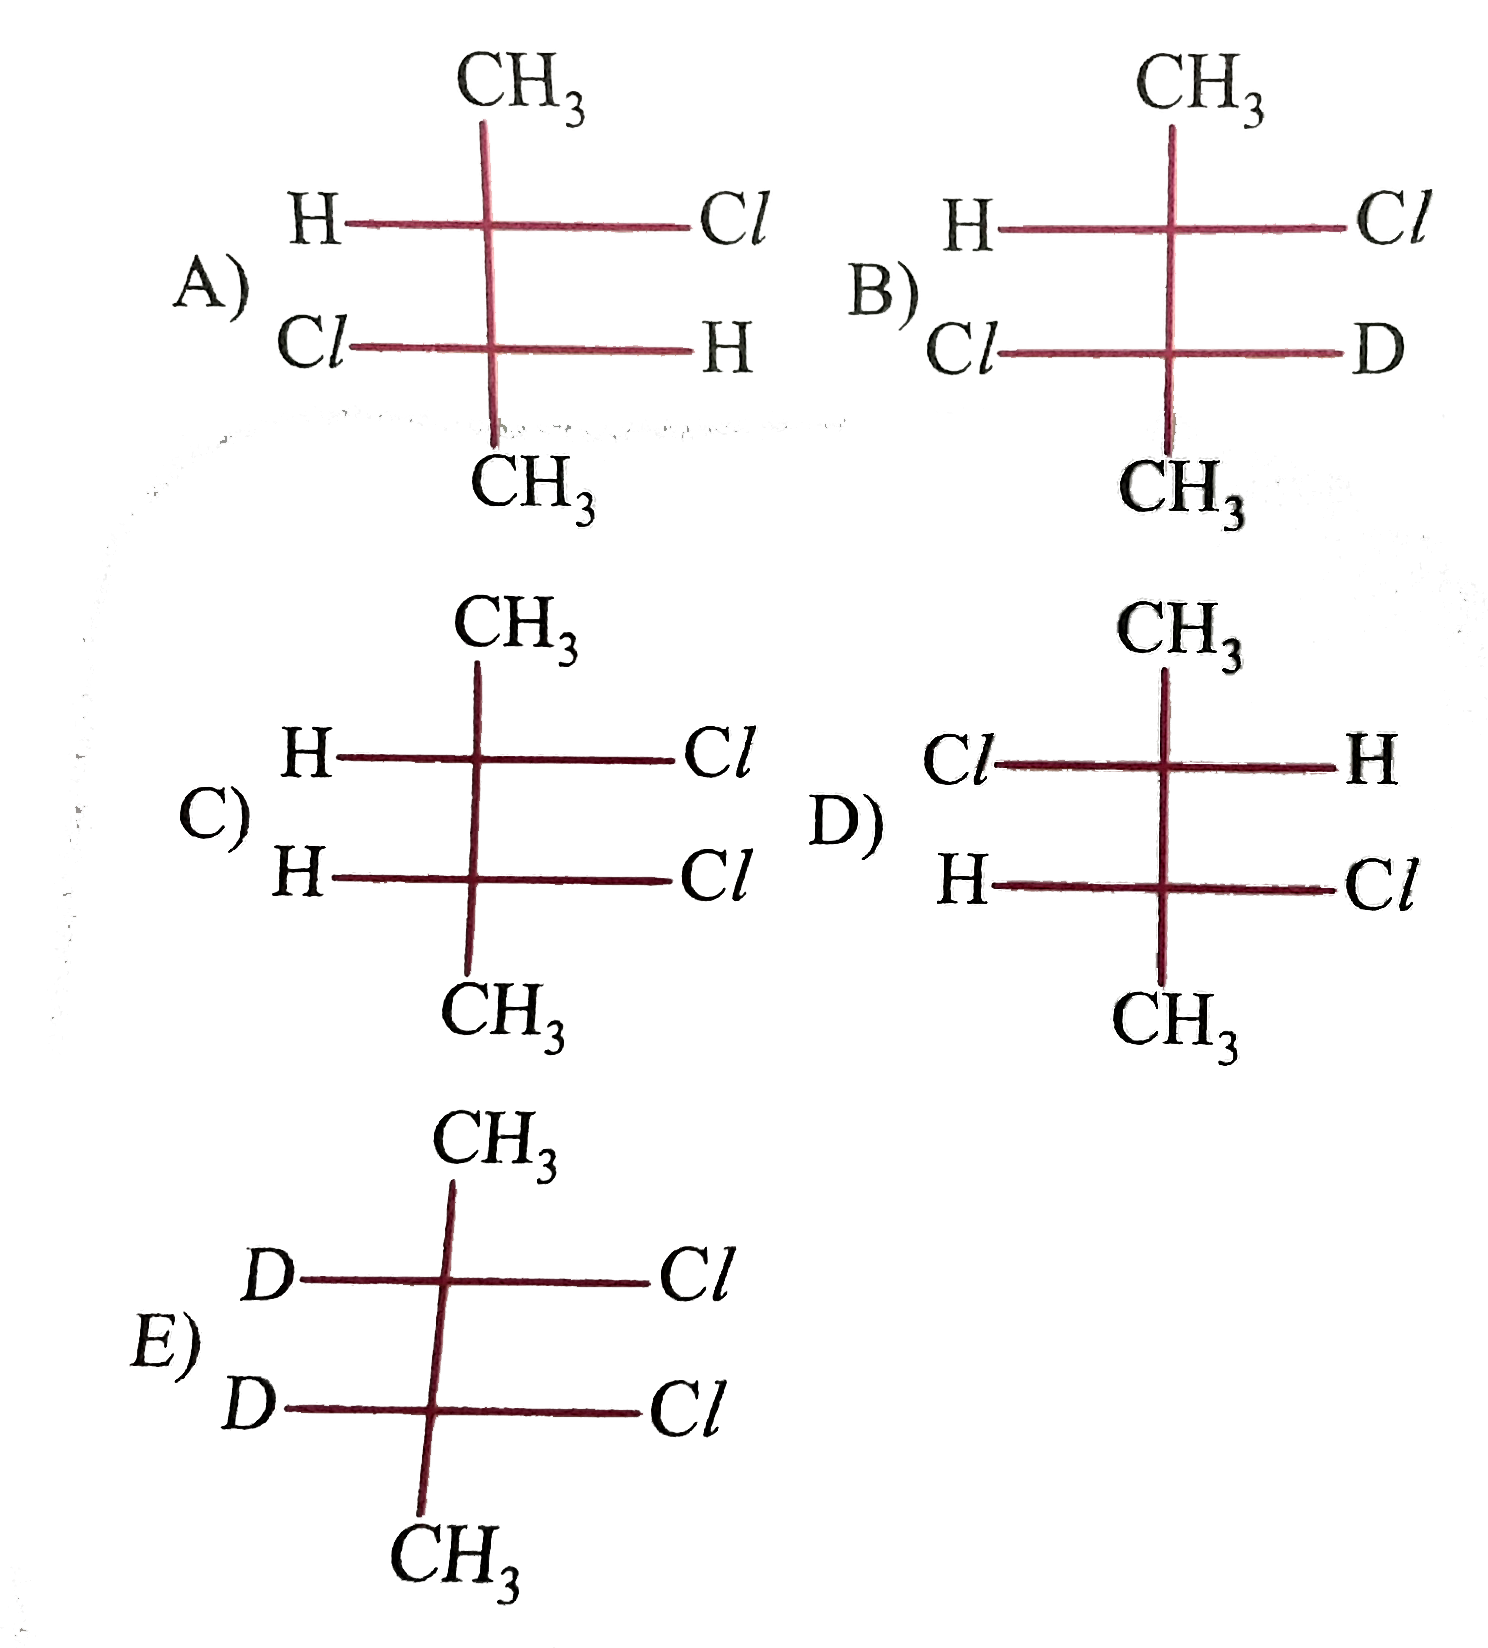 An organic compound having a carbon attached to four different group is optically actve, But is it that opposite is also true? That is, do all optically active organic compounds have chiral carbons? Not necessarily. Presence or absence of chiral centre is not the sufficiet criterion for optical activity. The ultimate criterion is presence or abosence of either plane or centre of symmtry. Two compounds which are non super im[osabble mirror images of each other are called enantiomers. If a compound contains more than one chiral carbon, new words are required to describe the relationship between various stereo isomers of the compounds. Those words are diastereomers and mesomers.   Which of the following form diastereomeric pair?